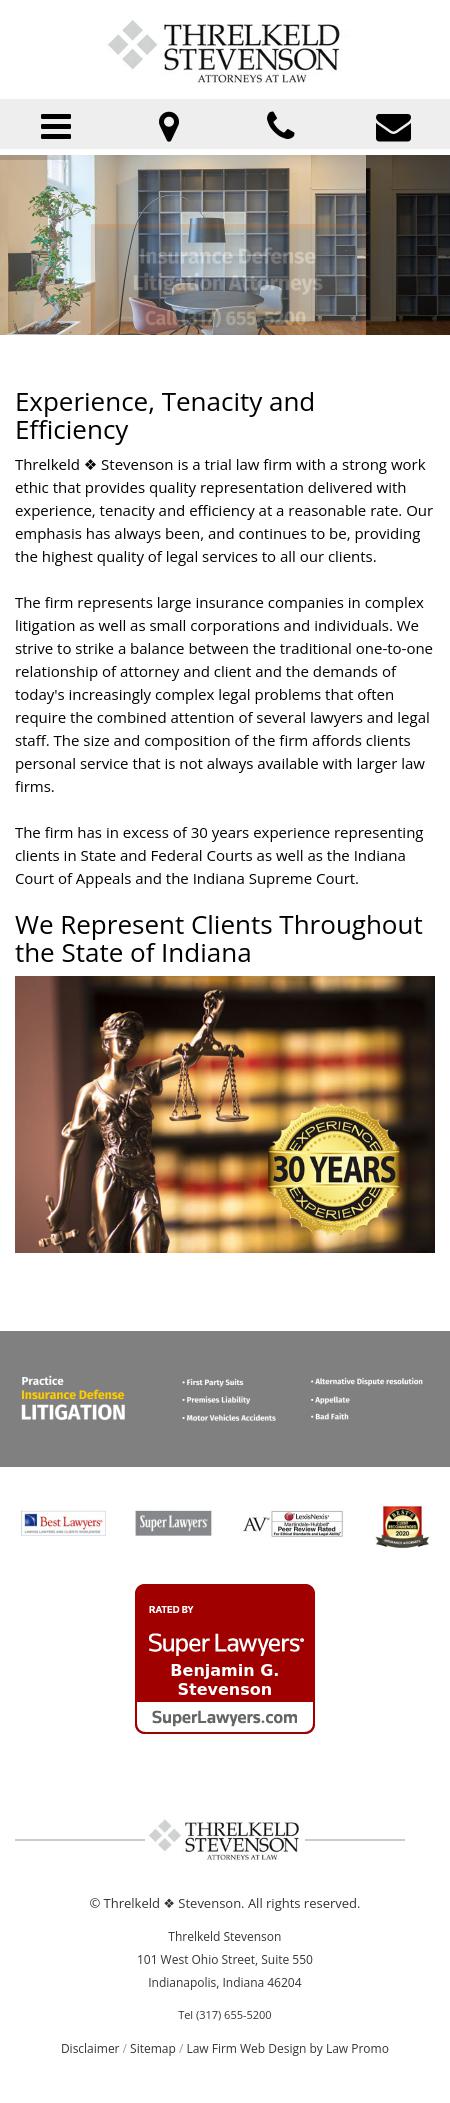 Threlkeld & Associates - Indianapolis IN Lawyers